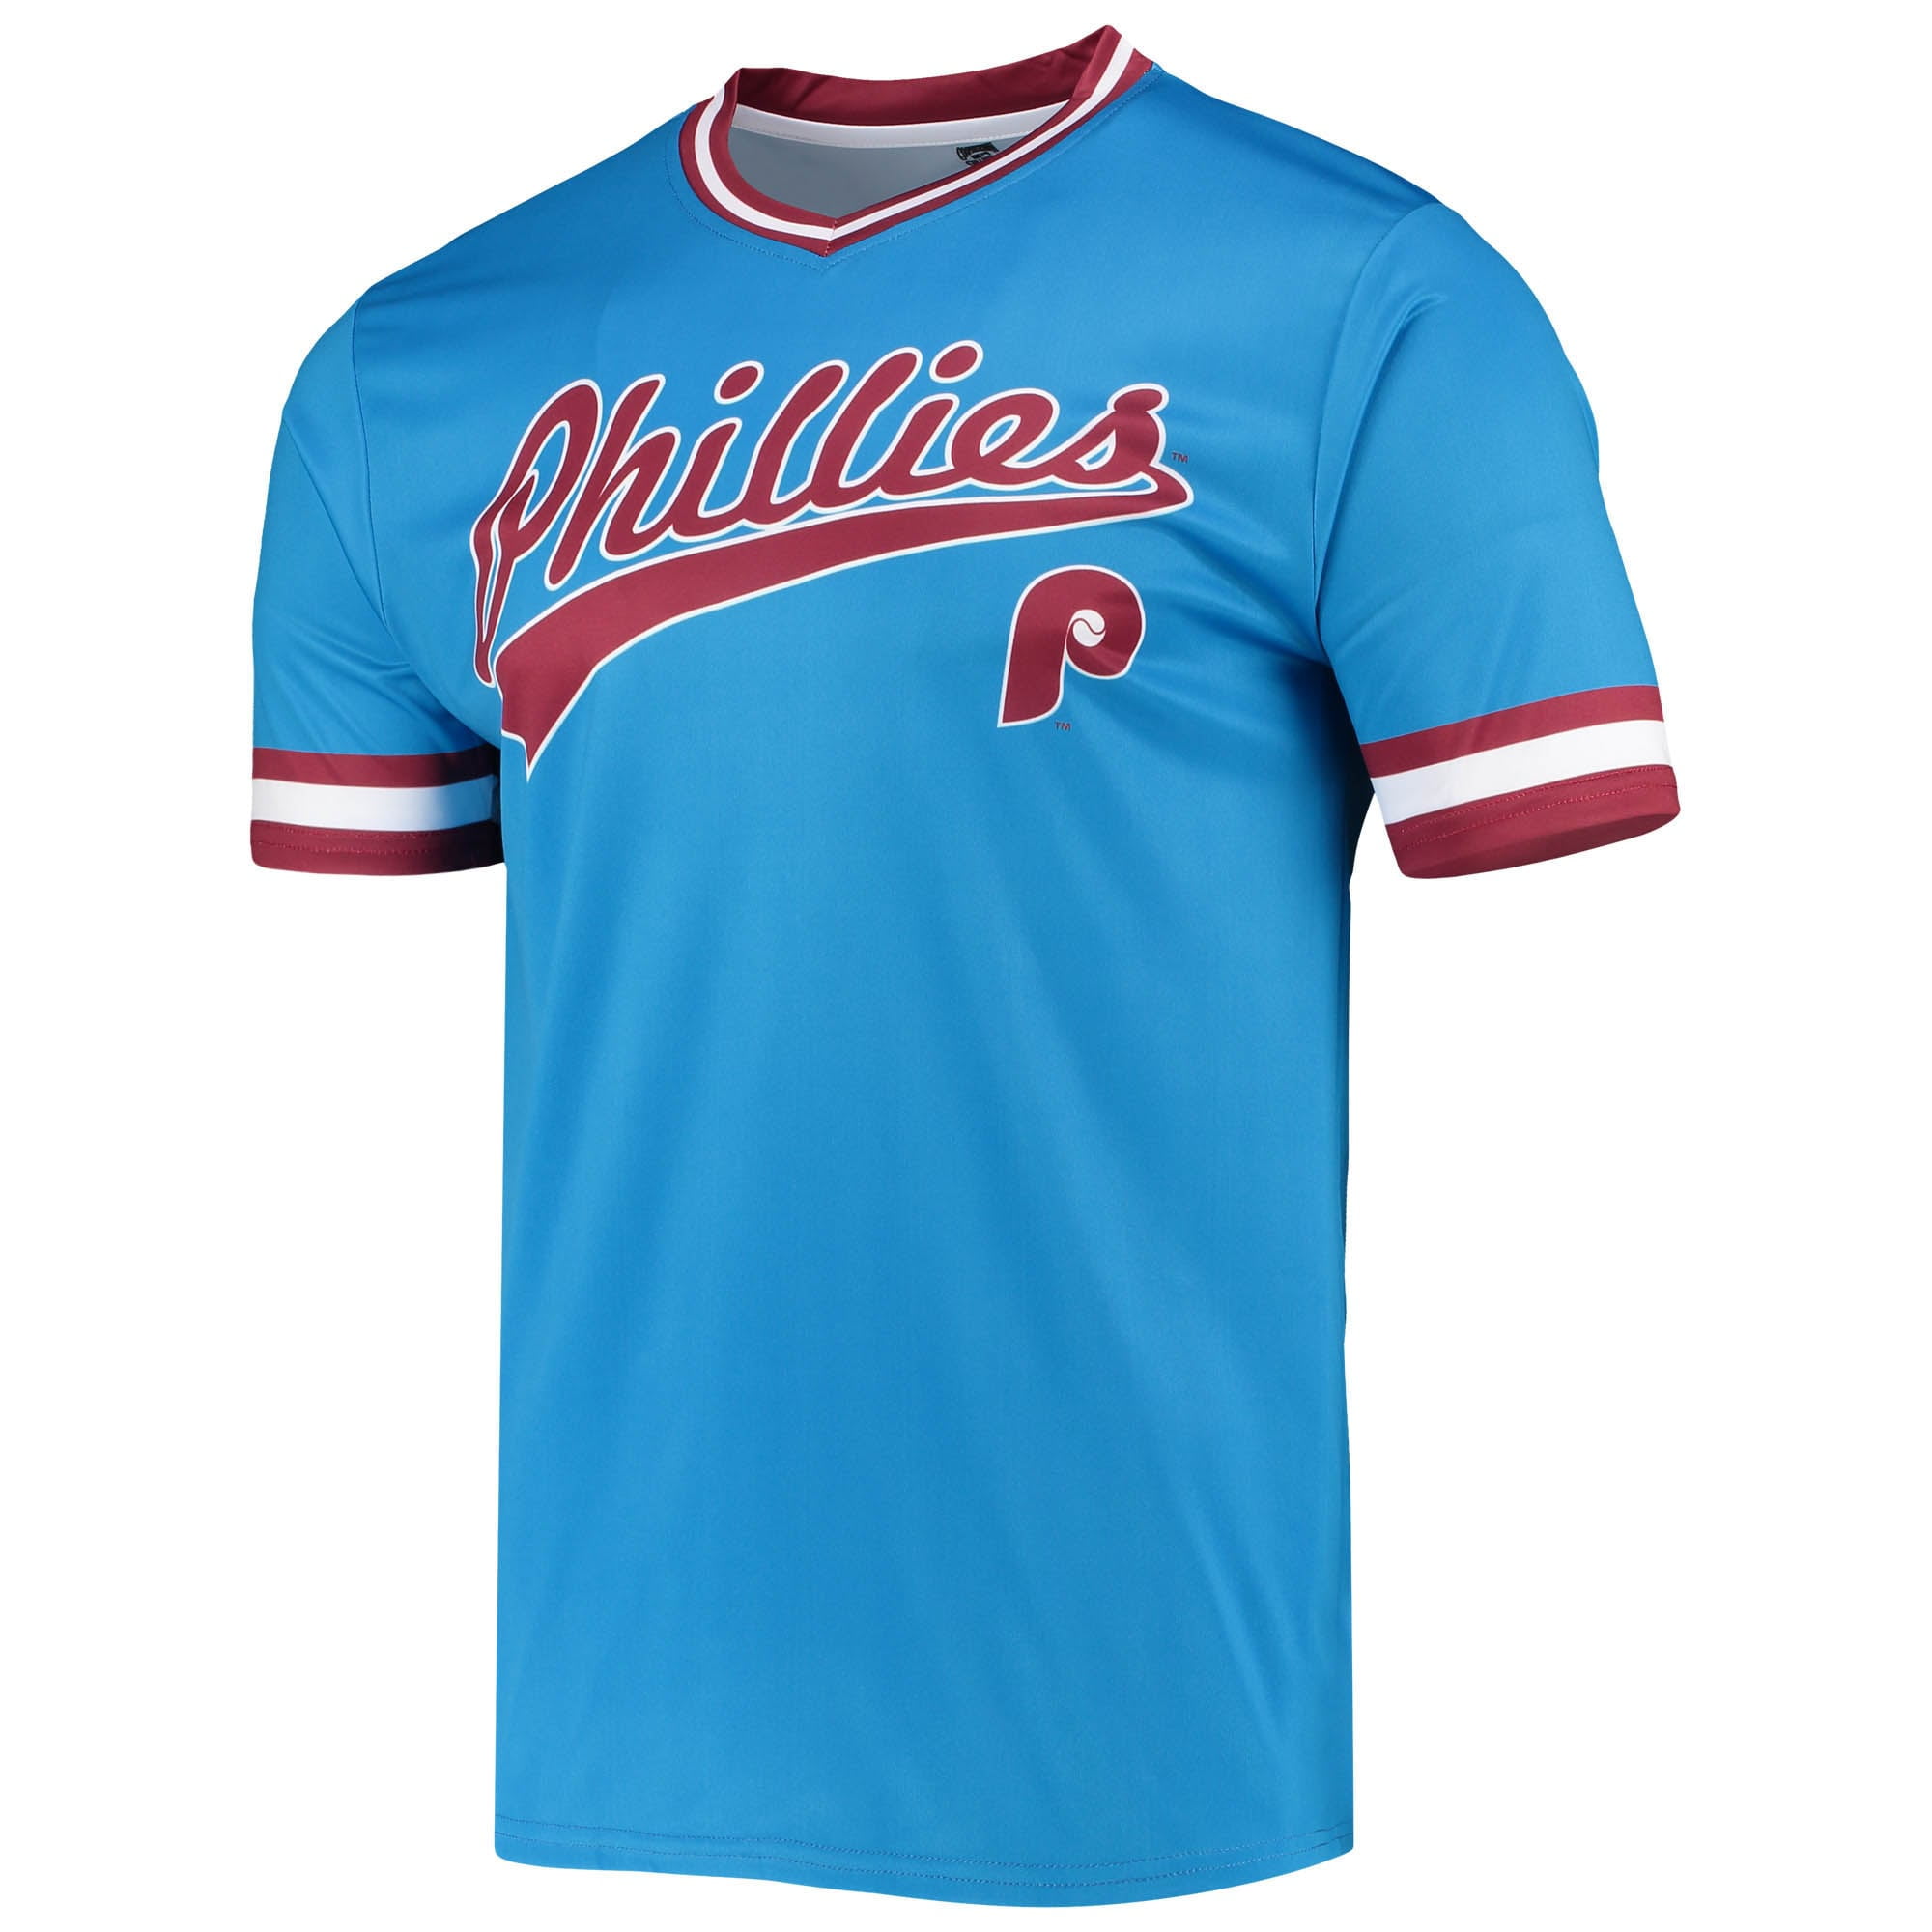 Men's Stitches Light Blue/Burgundy Philadelphia Phillies Cooperstown  Collection V-Neck Team Color Jersey 